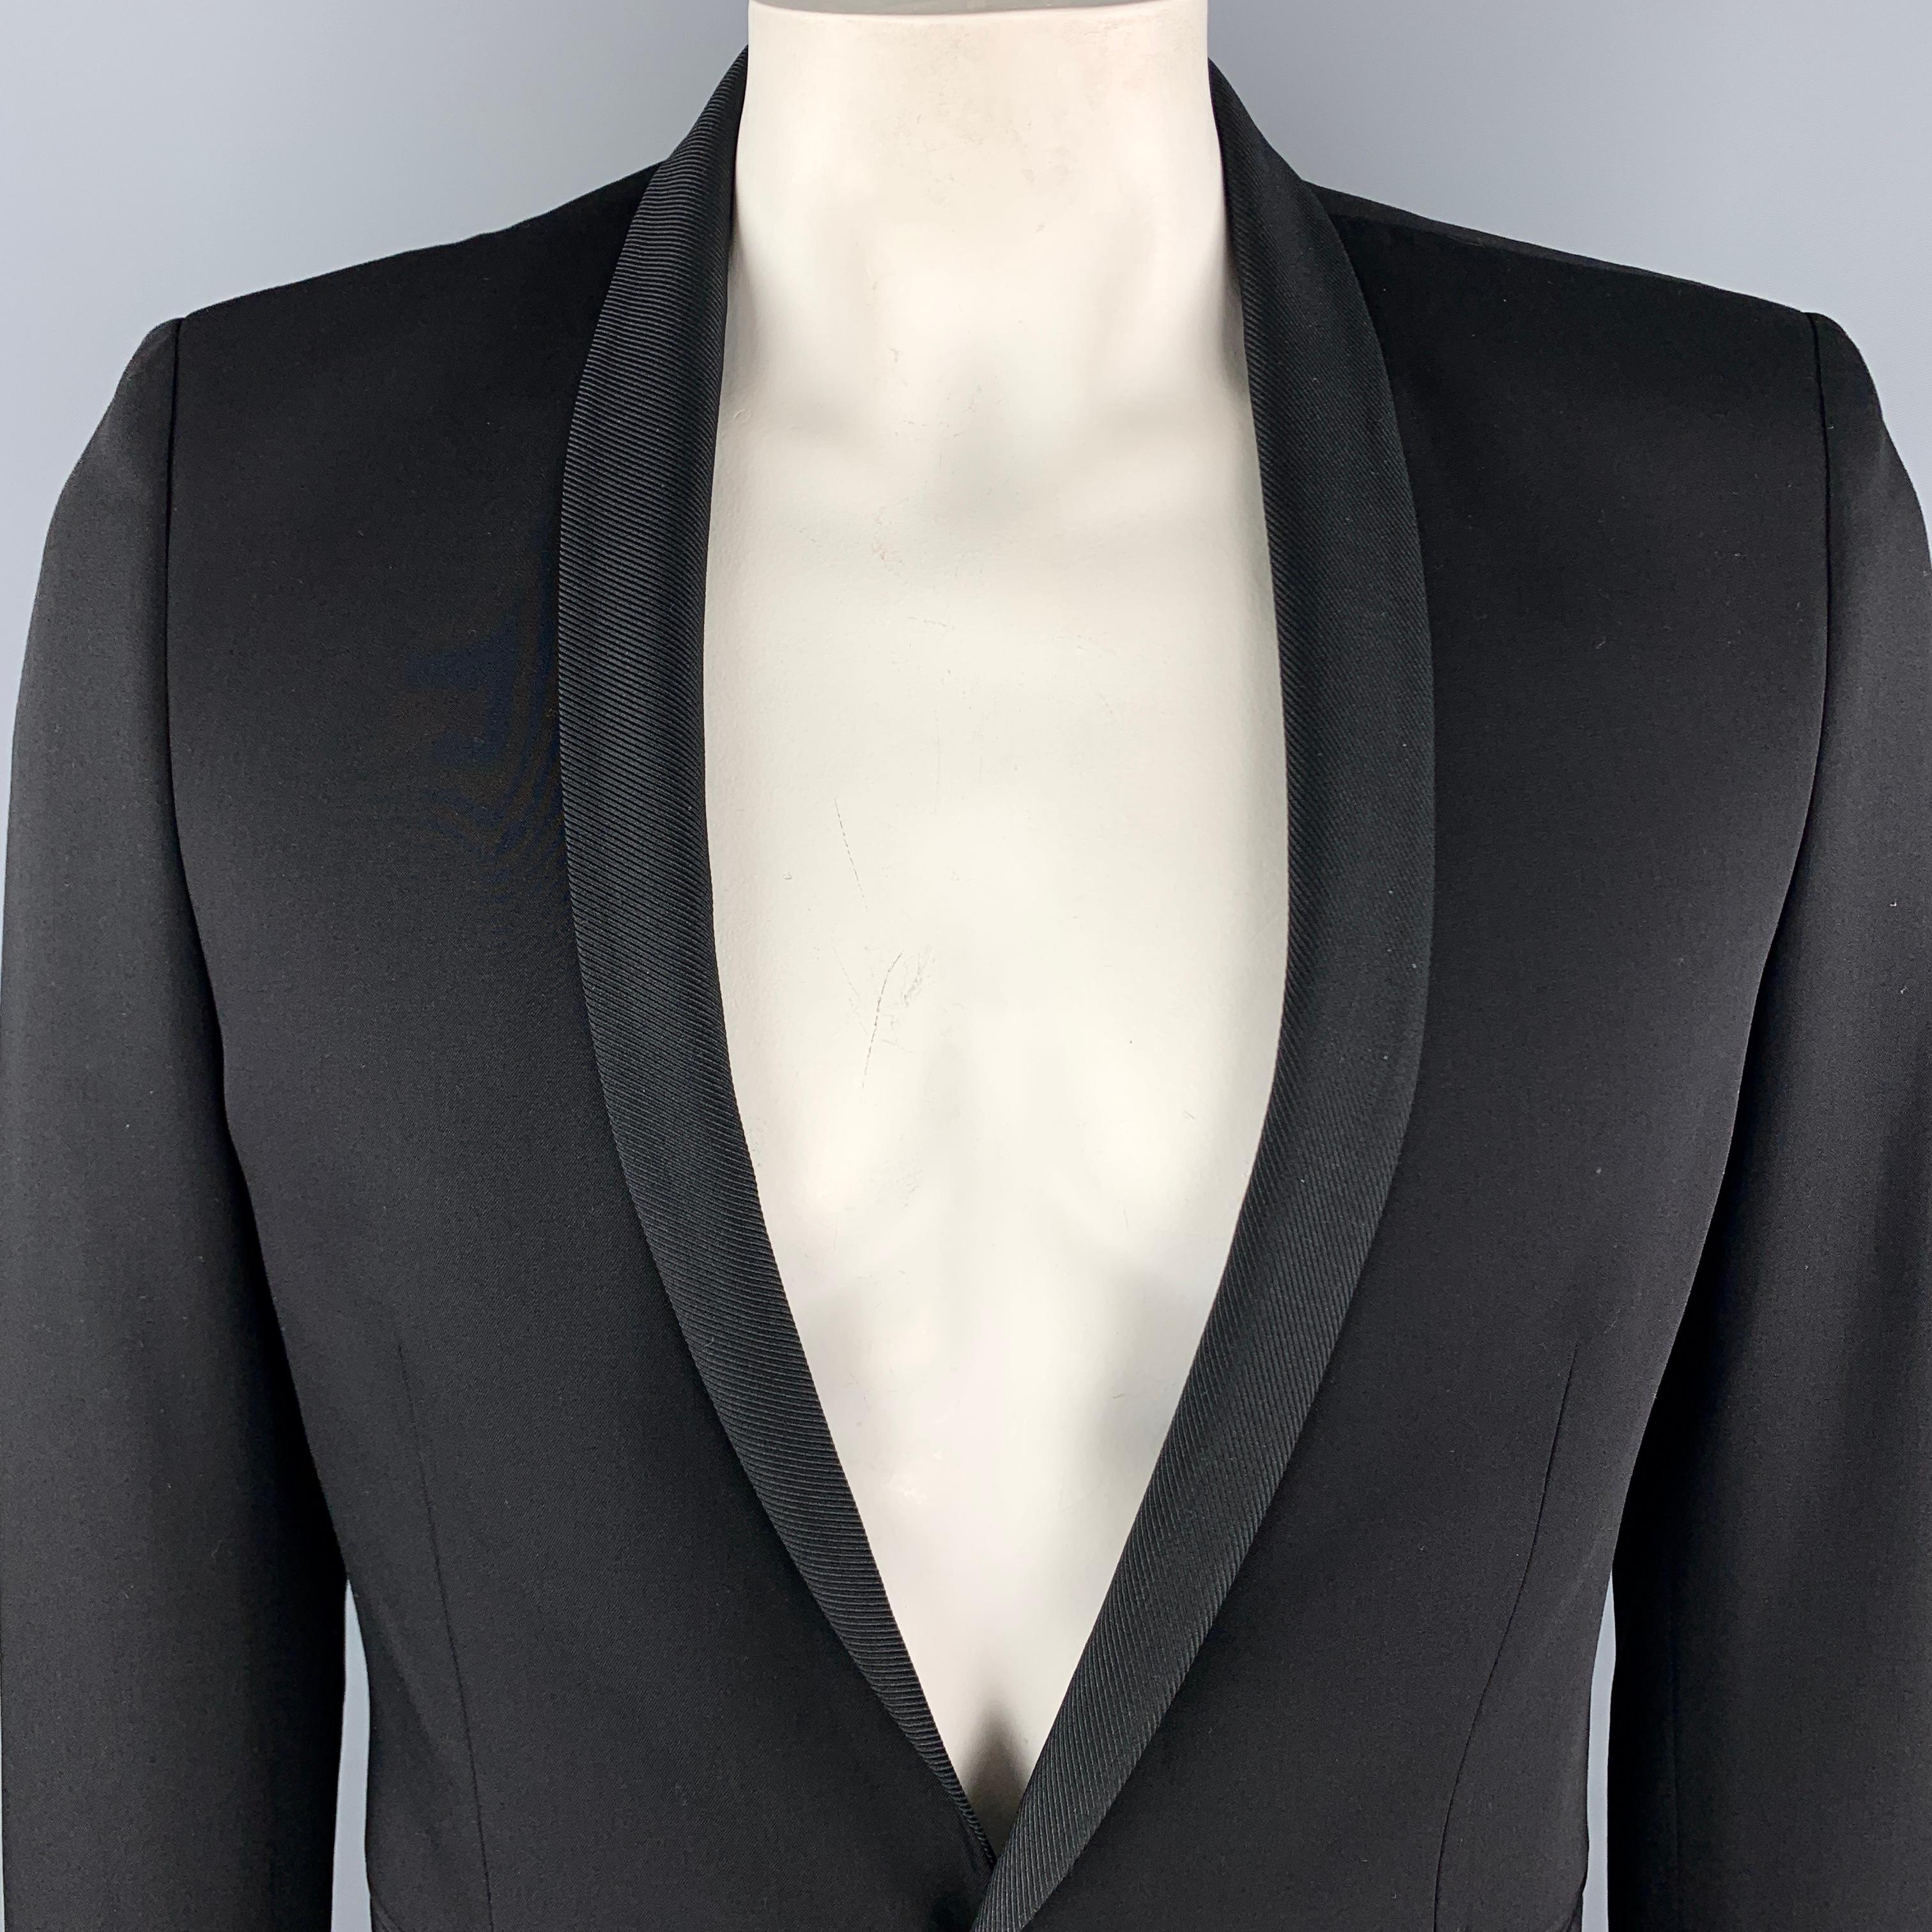 THE KOOPLES Fitted Sport Coat comes in a black solid wool material, with a shawl collar, a single button at closure, single breasted, slit pockets, functional buttons at cuffs, and a double vent at back.

Excellent Pre-Owned Condition.
Marked: IT